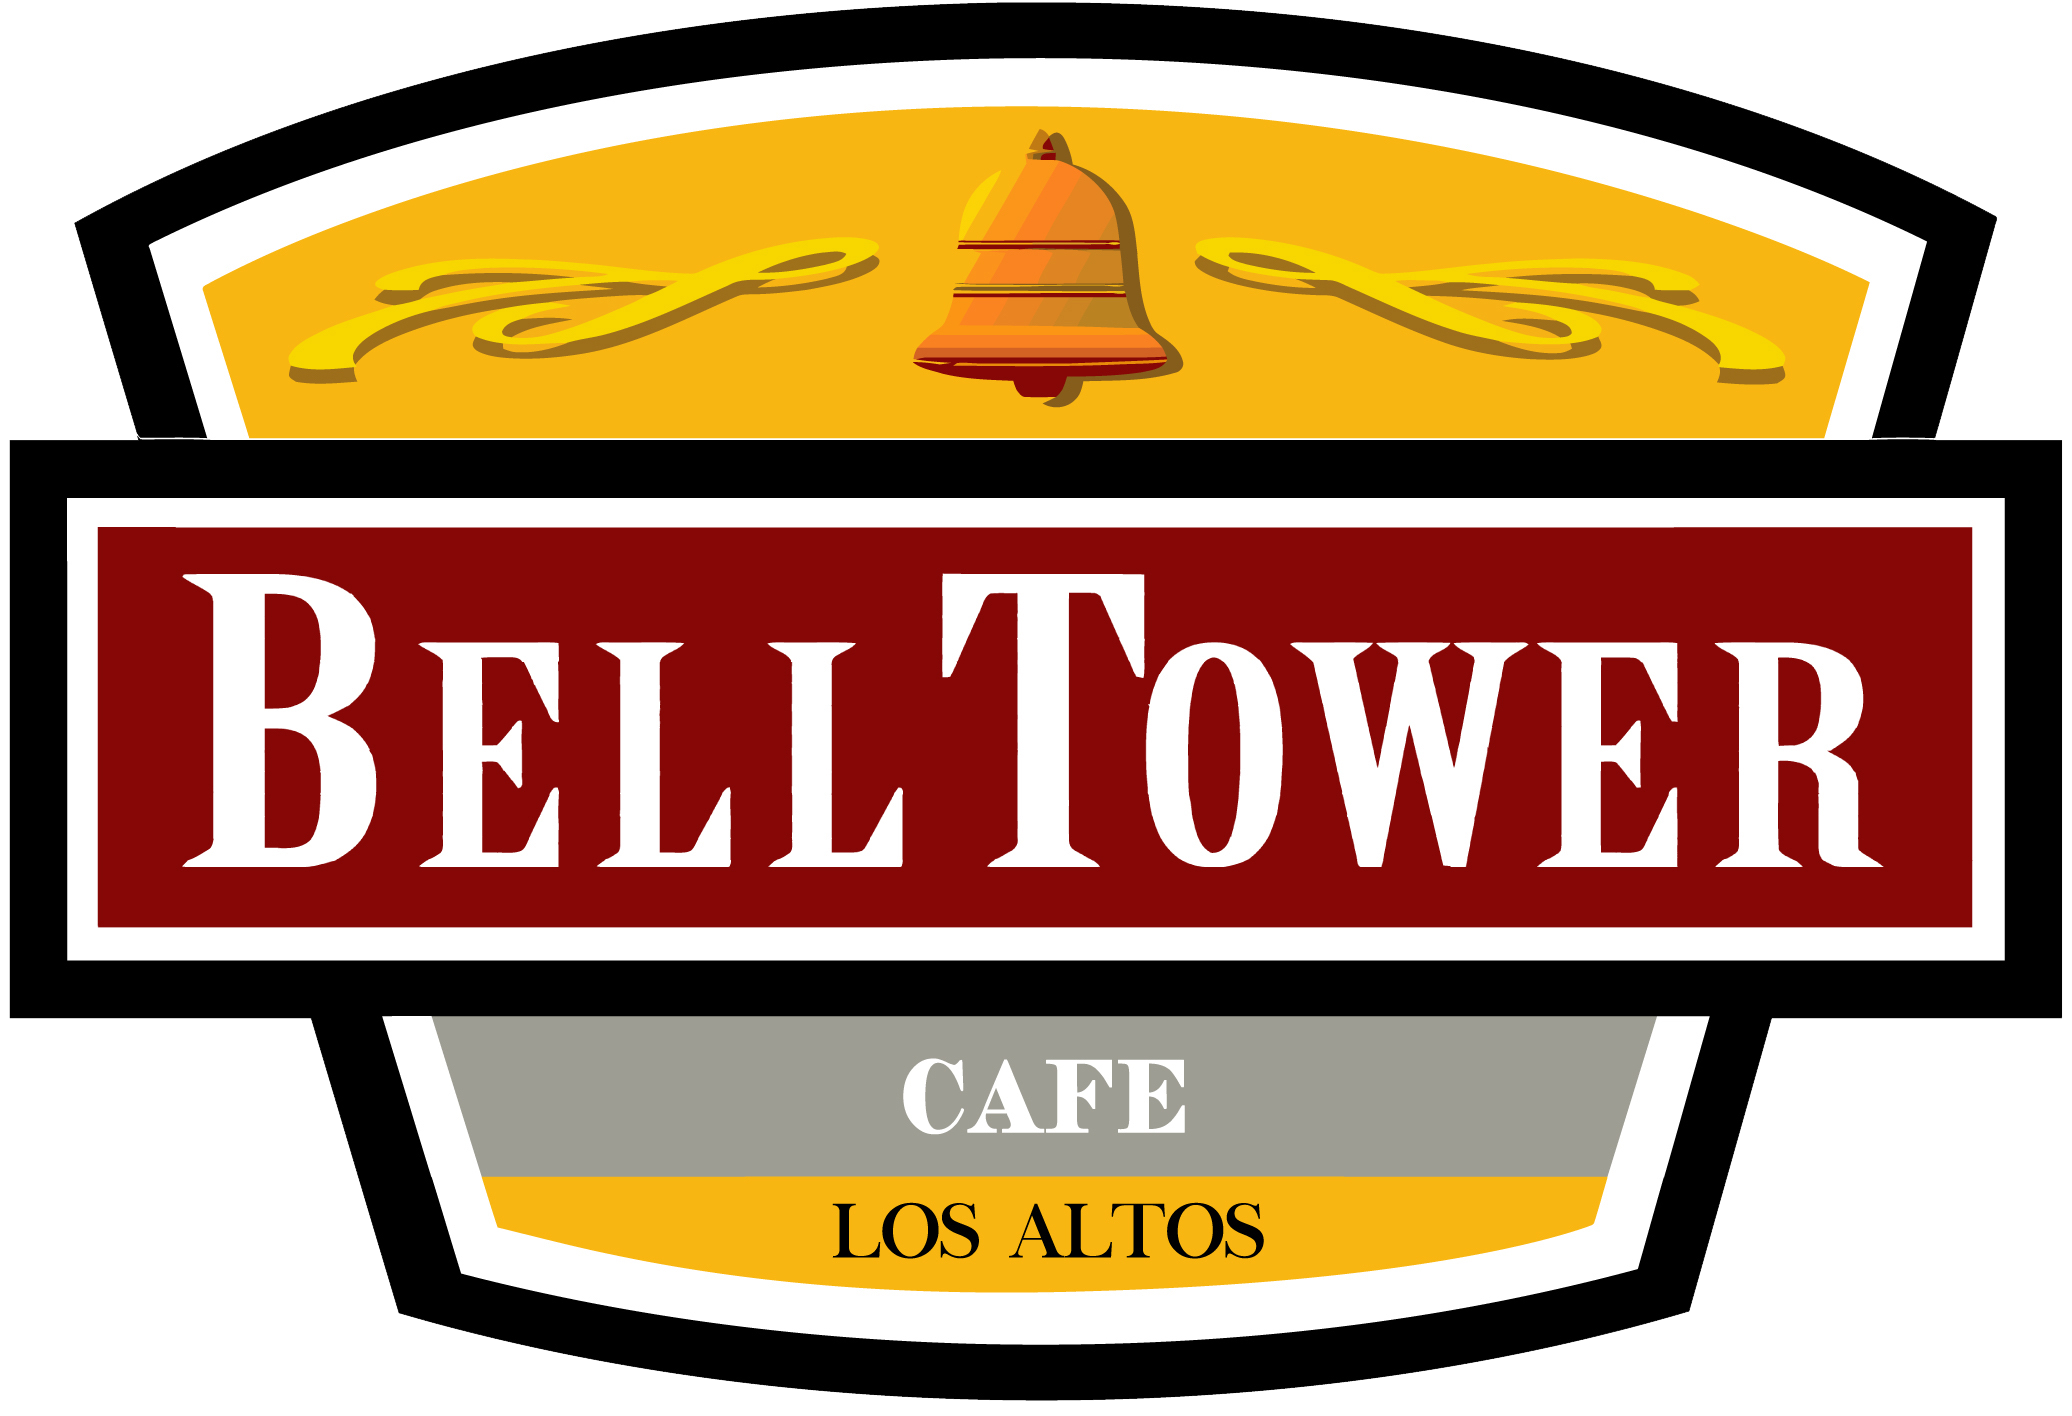 Bell Tower Cafe